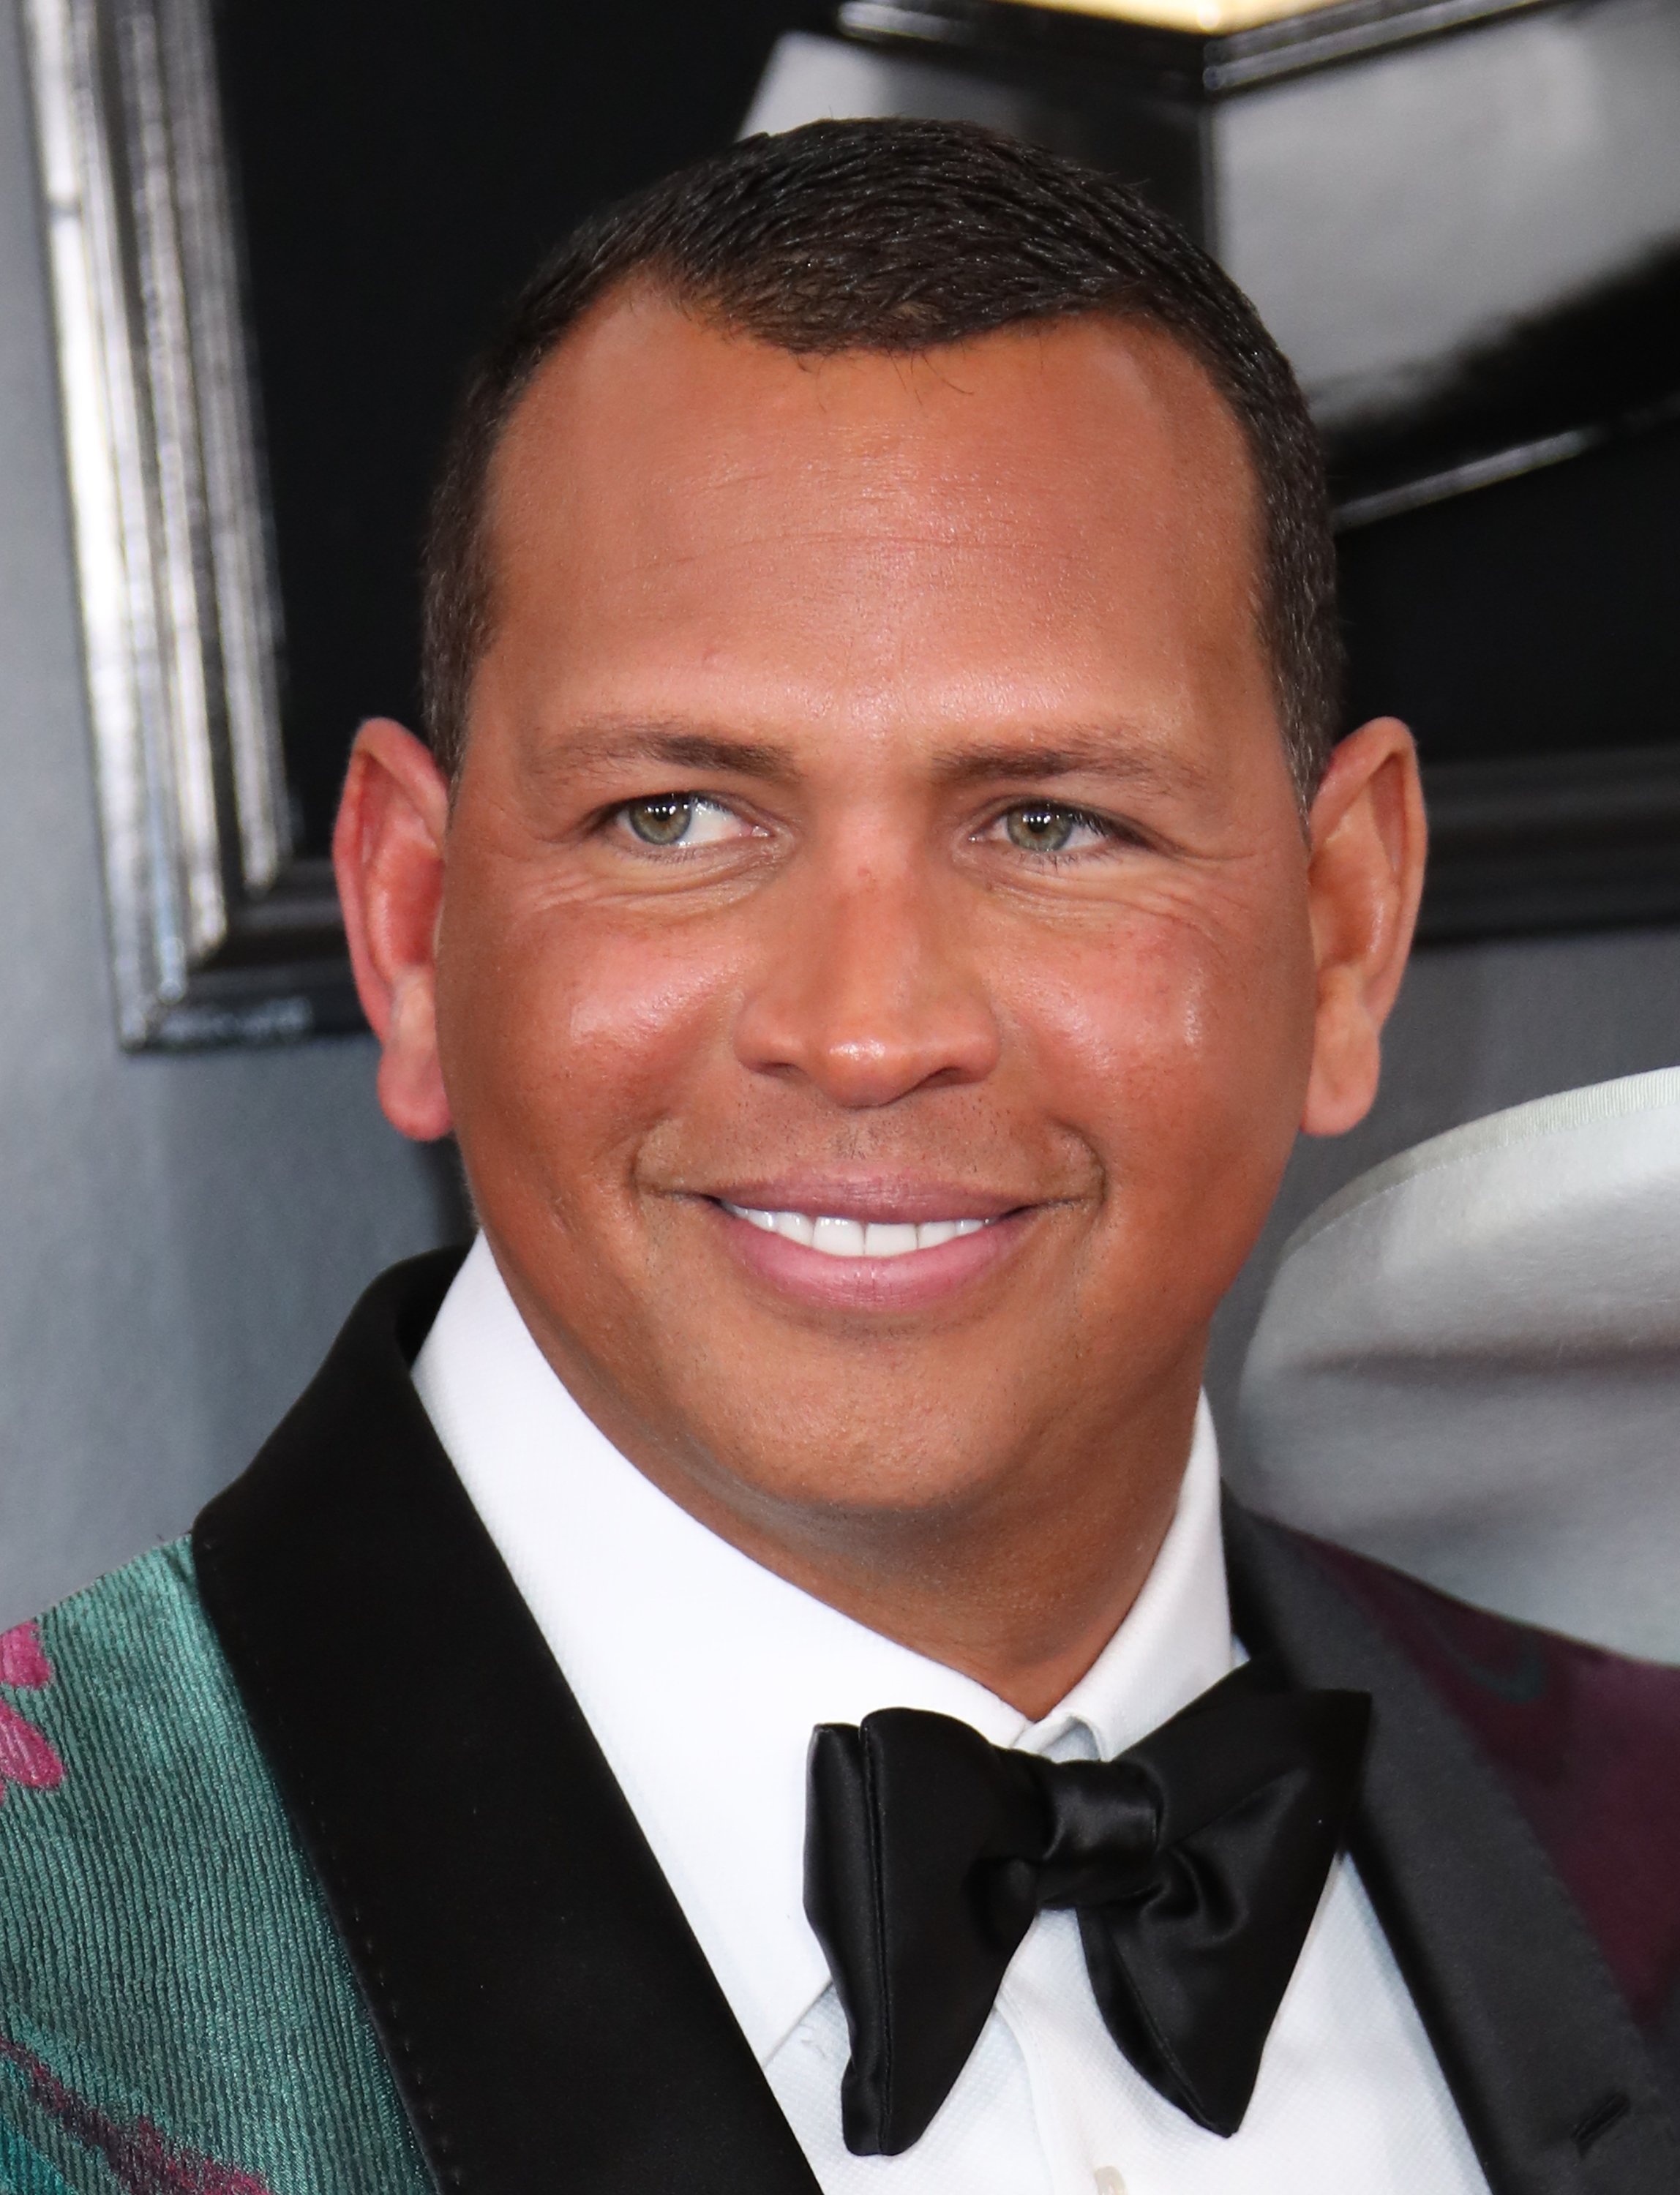 J Lo's Fiancé Alex Rodriguez Reportedly Lost 500K of Jewelry and